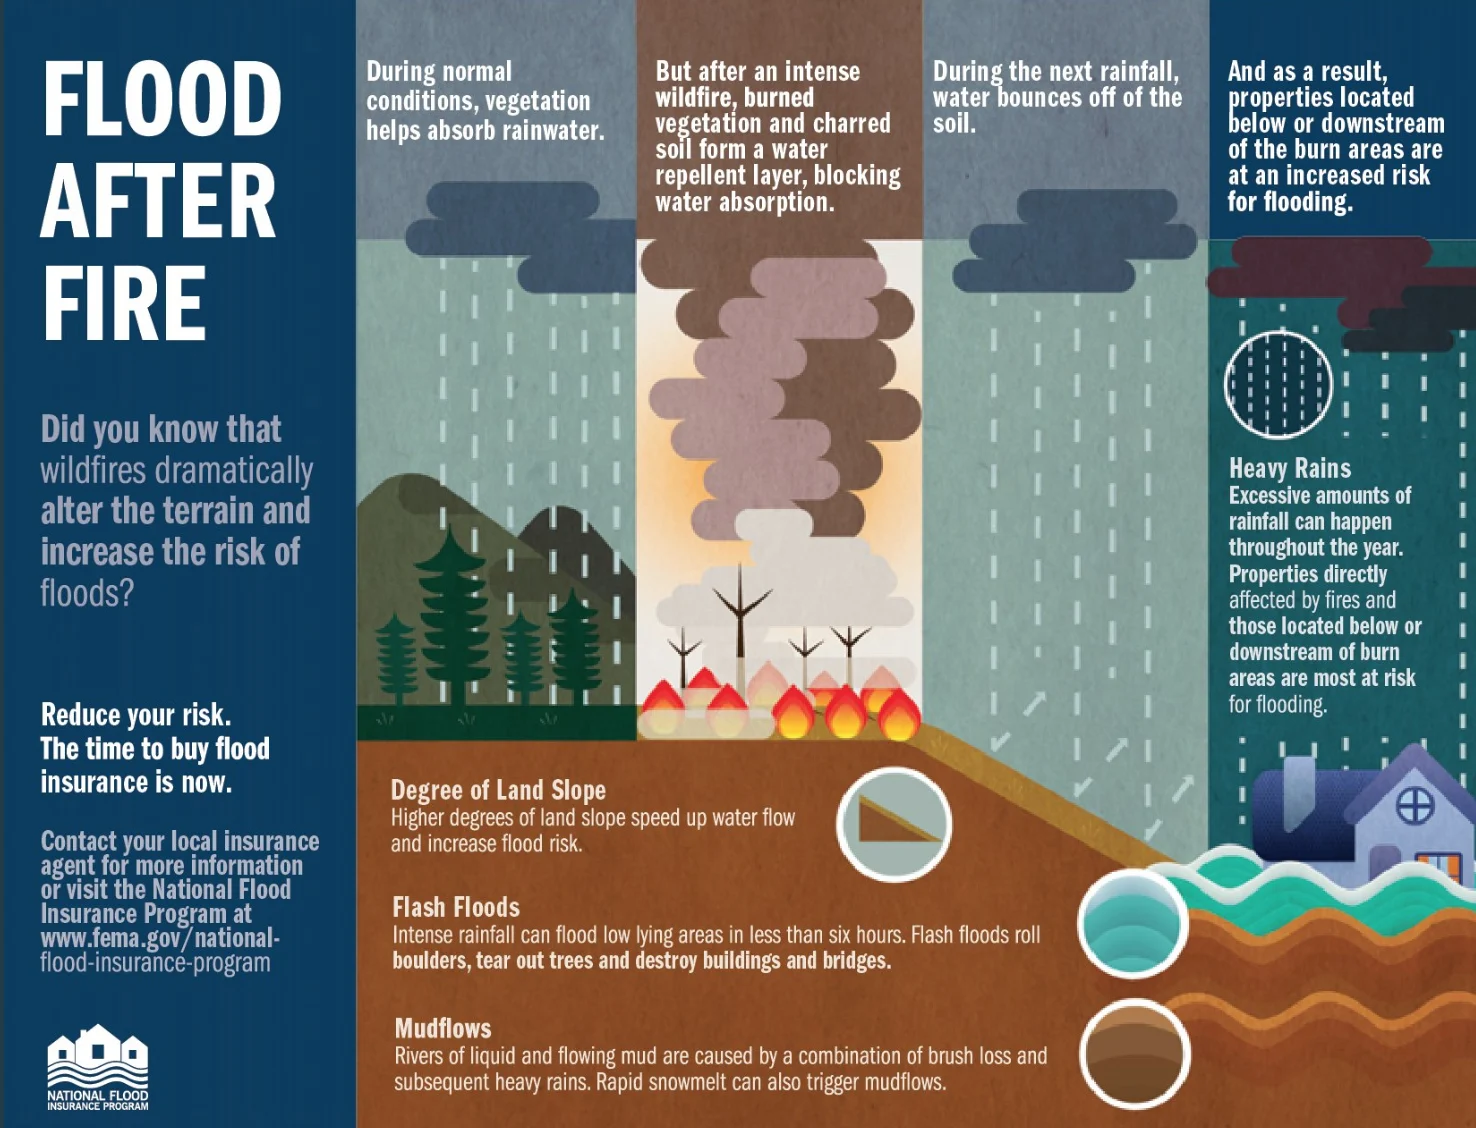 NWS San Diego/Twitter - Flood after fires graphic. 